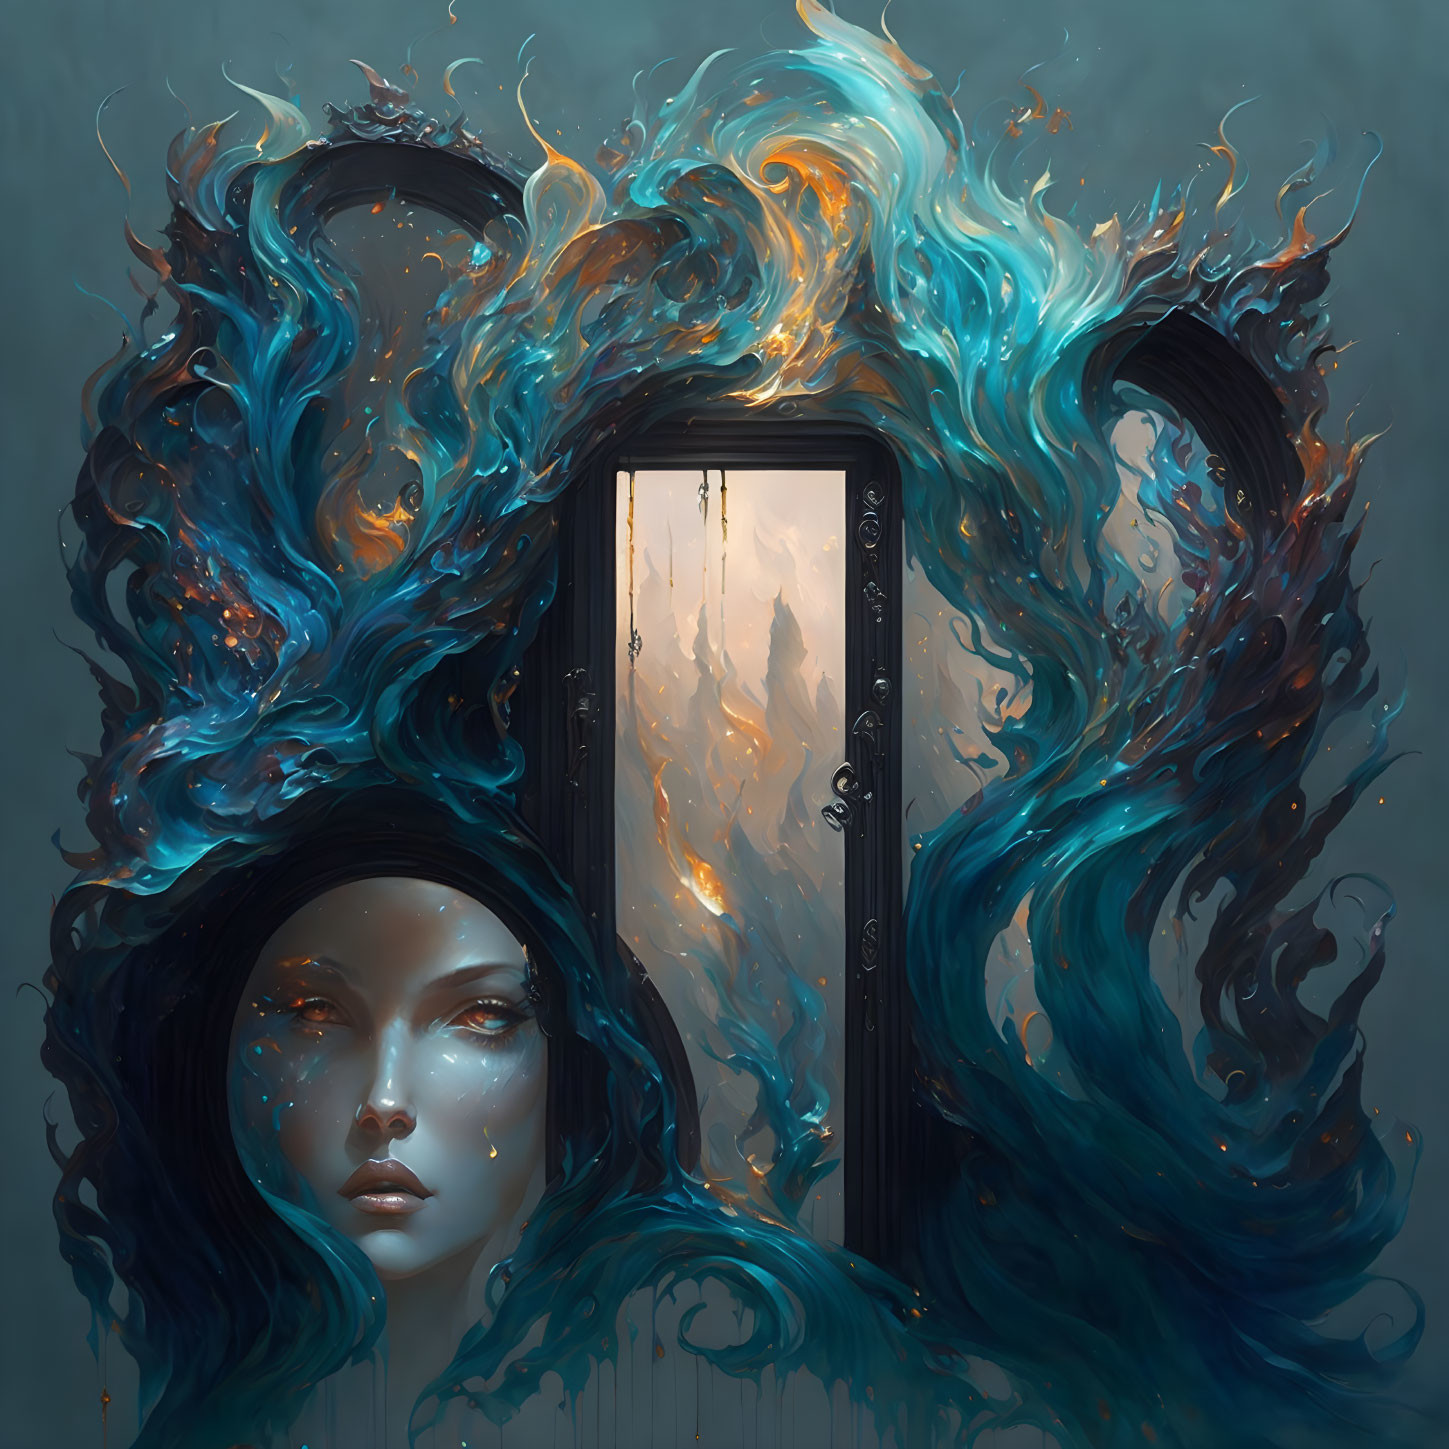 Mystical artwork of woman with flowing hair and fiery aquatic elements